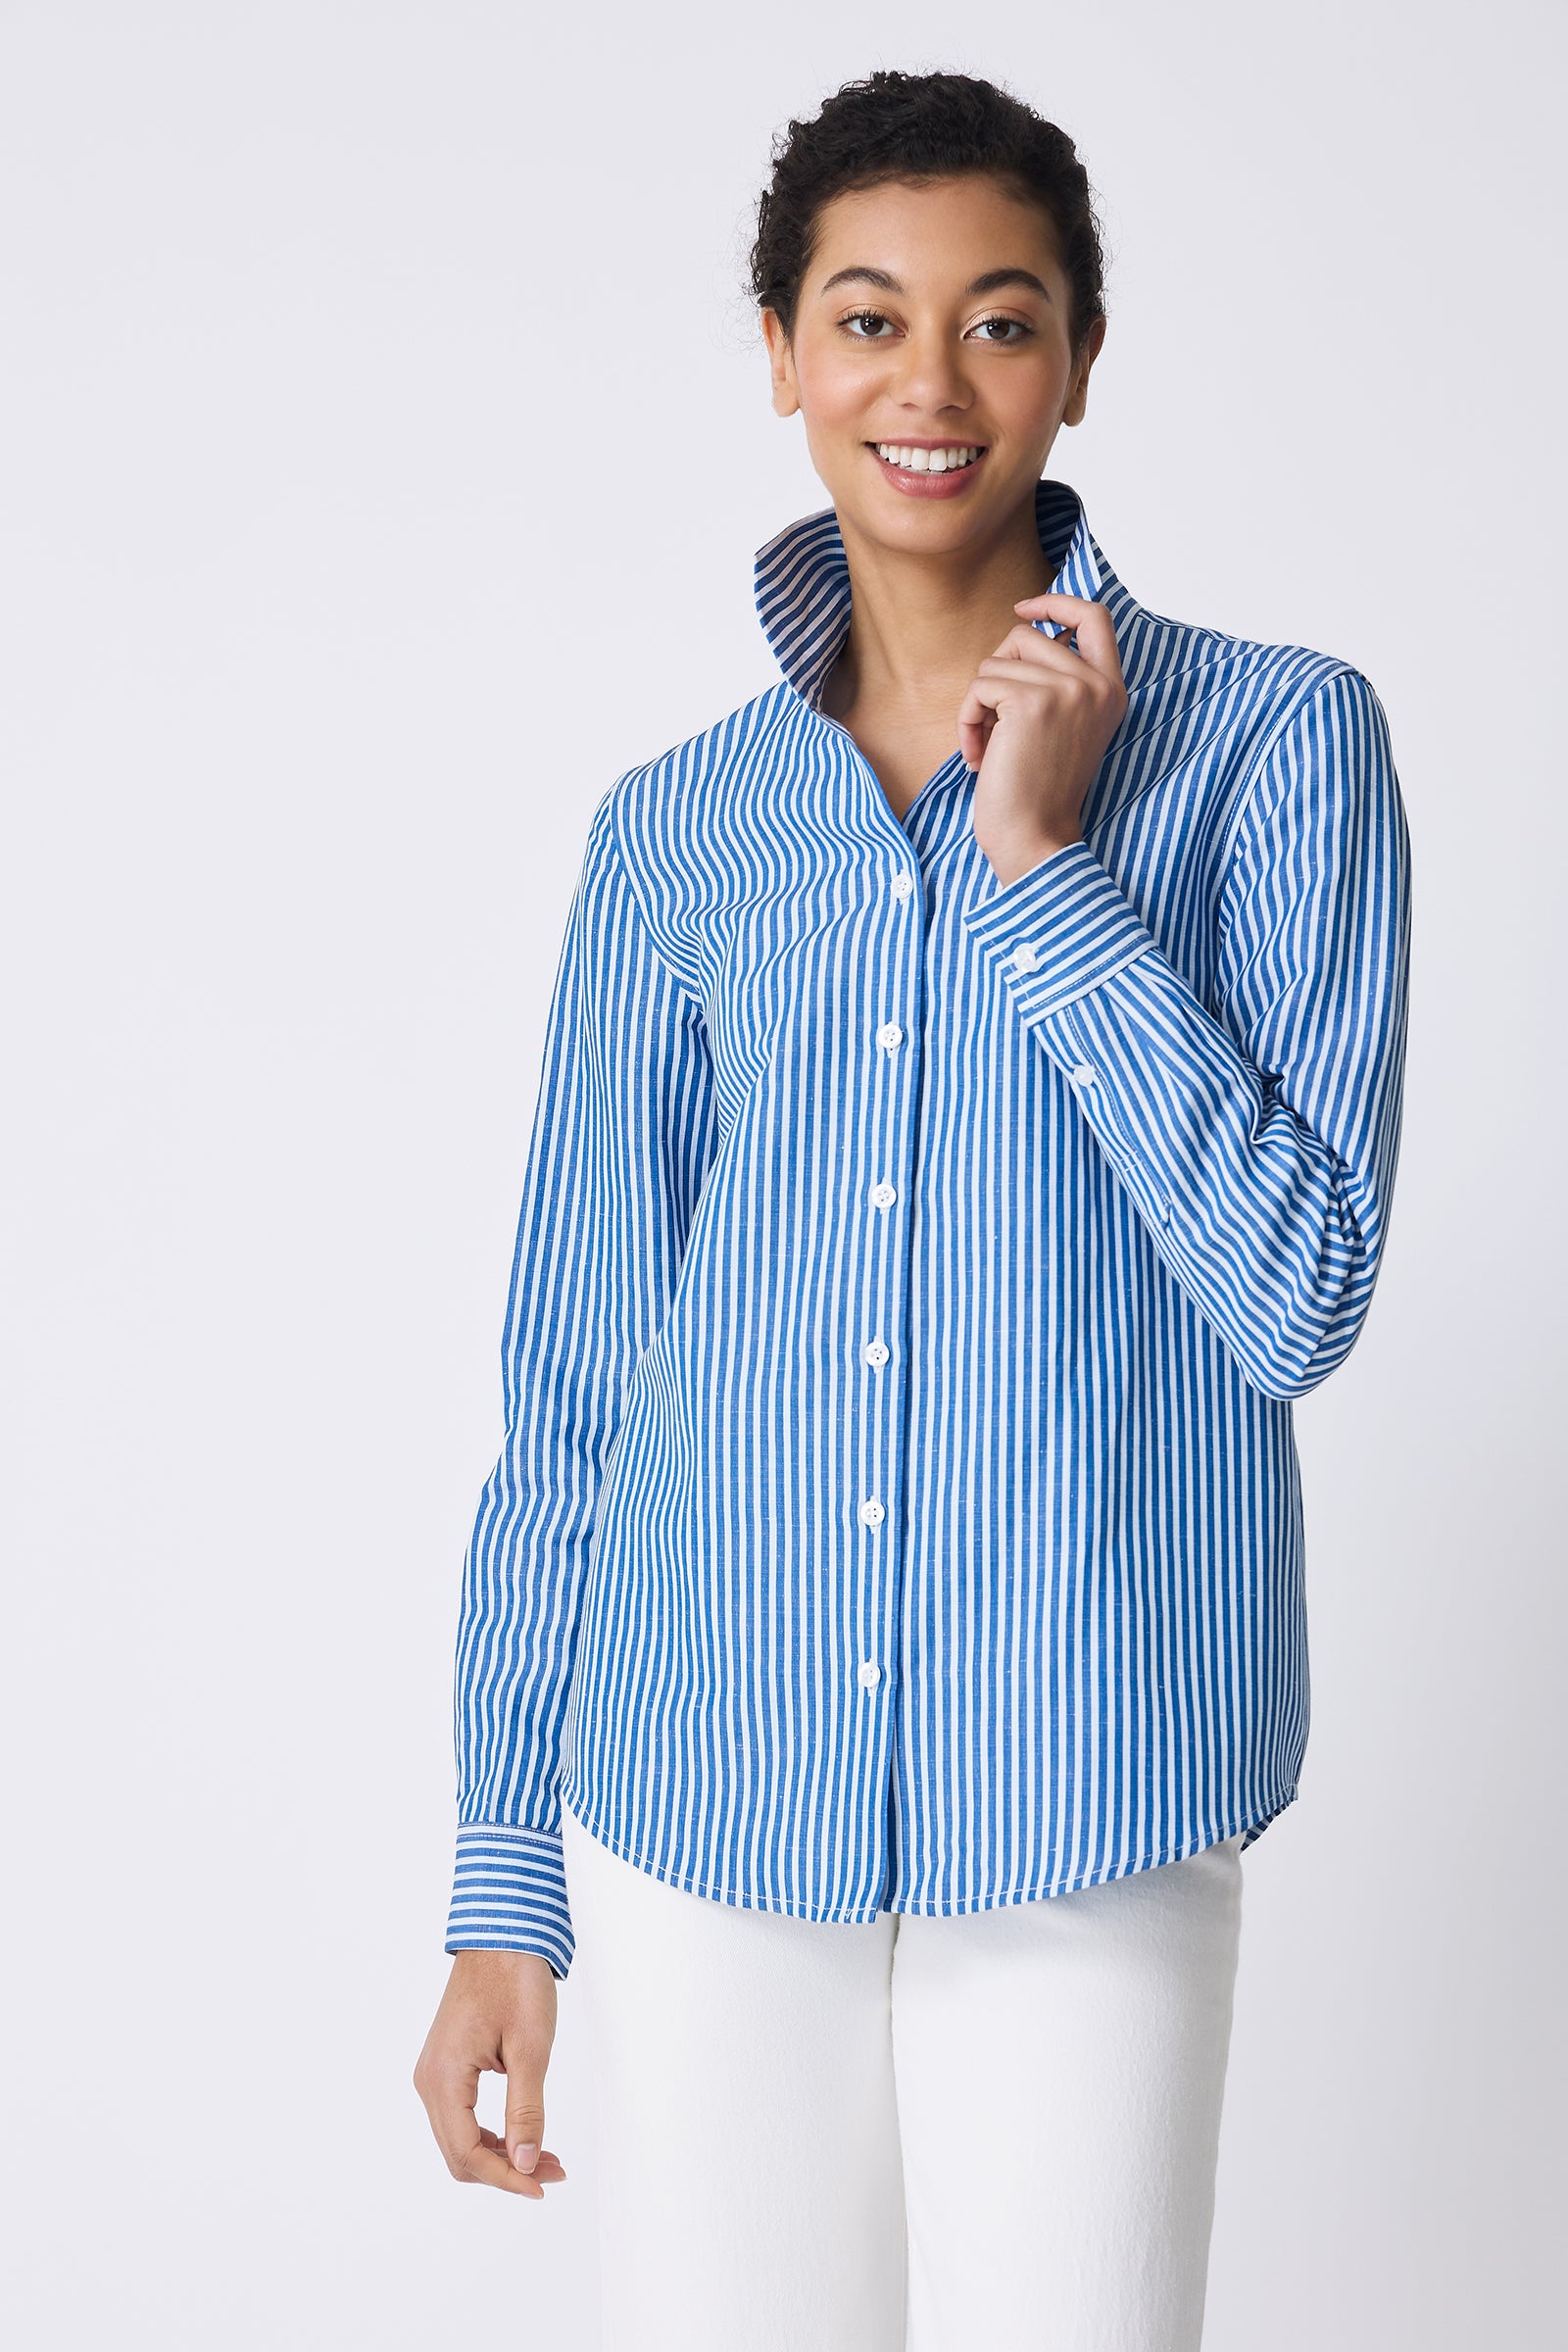 Kal Rieman Ginna Box Pleat Shirt in Cabana Stripe Blue on model smiling front view